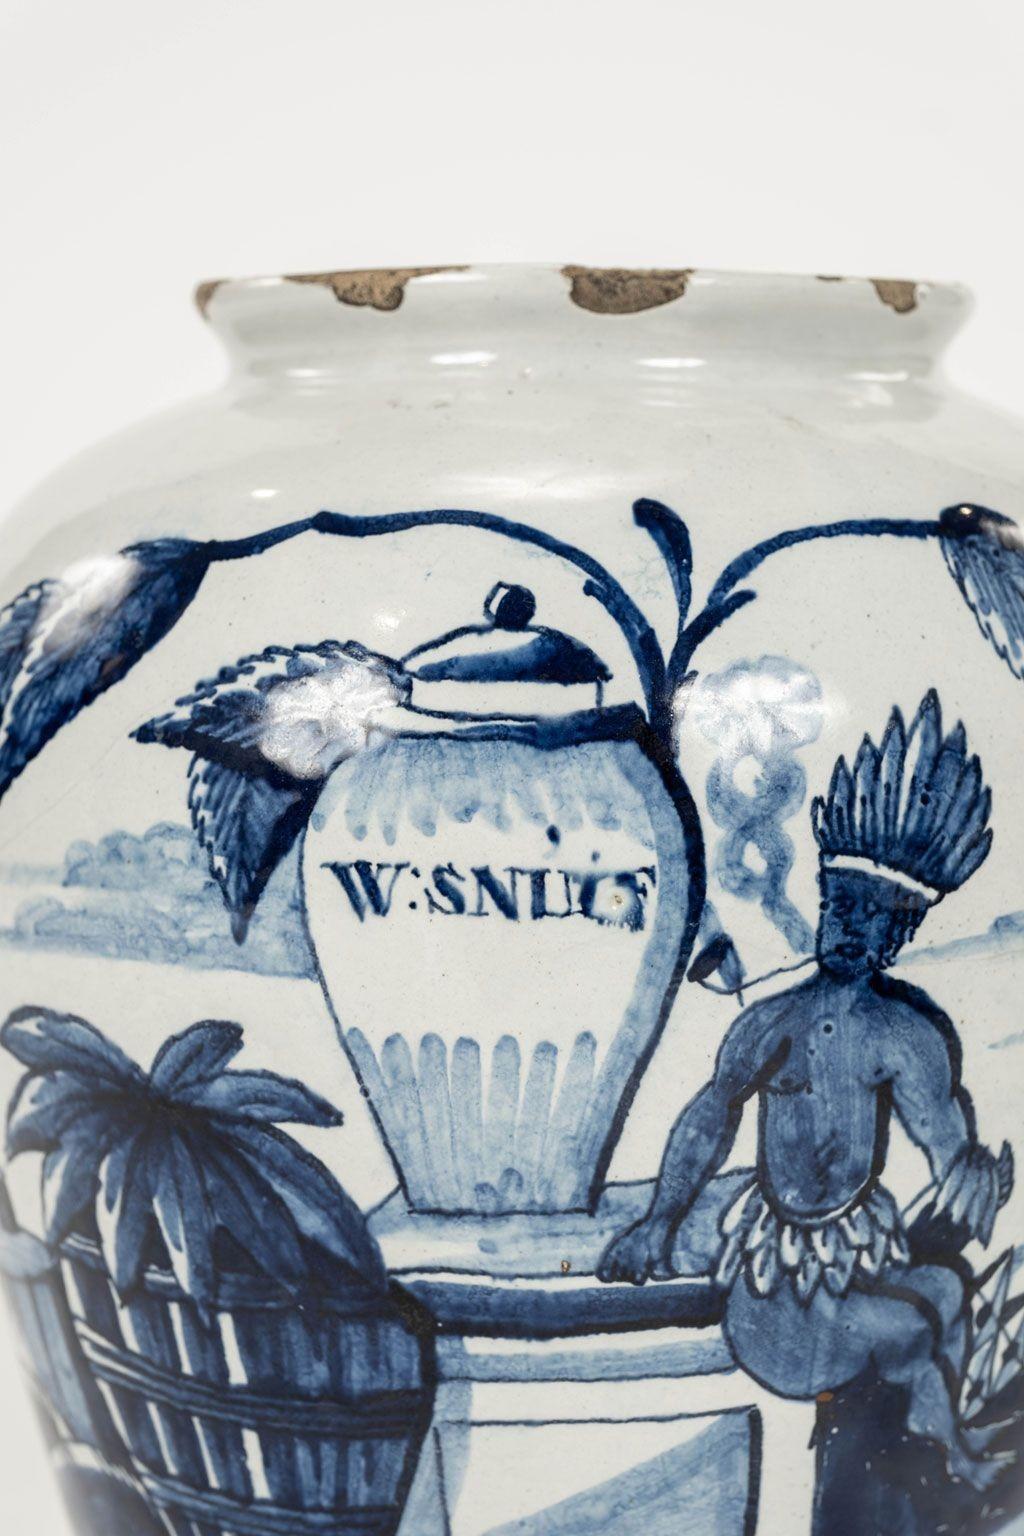 Delft blue and white “W:Snuif” urn-shape tobacco jar with lid, Netherlands, circa 1780. Inscribed “W:Snuif” and decorated with coastal scene and seated “Amerindian” figure. W:Snuif refers to finely ground snuff tobacco commonly inhaled throughout